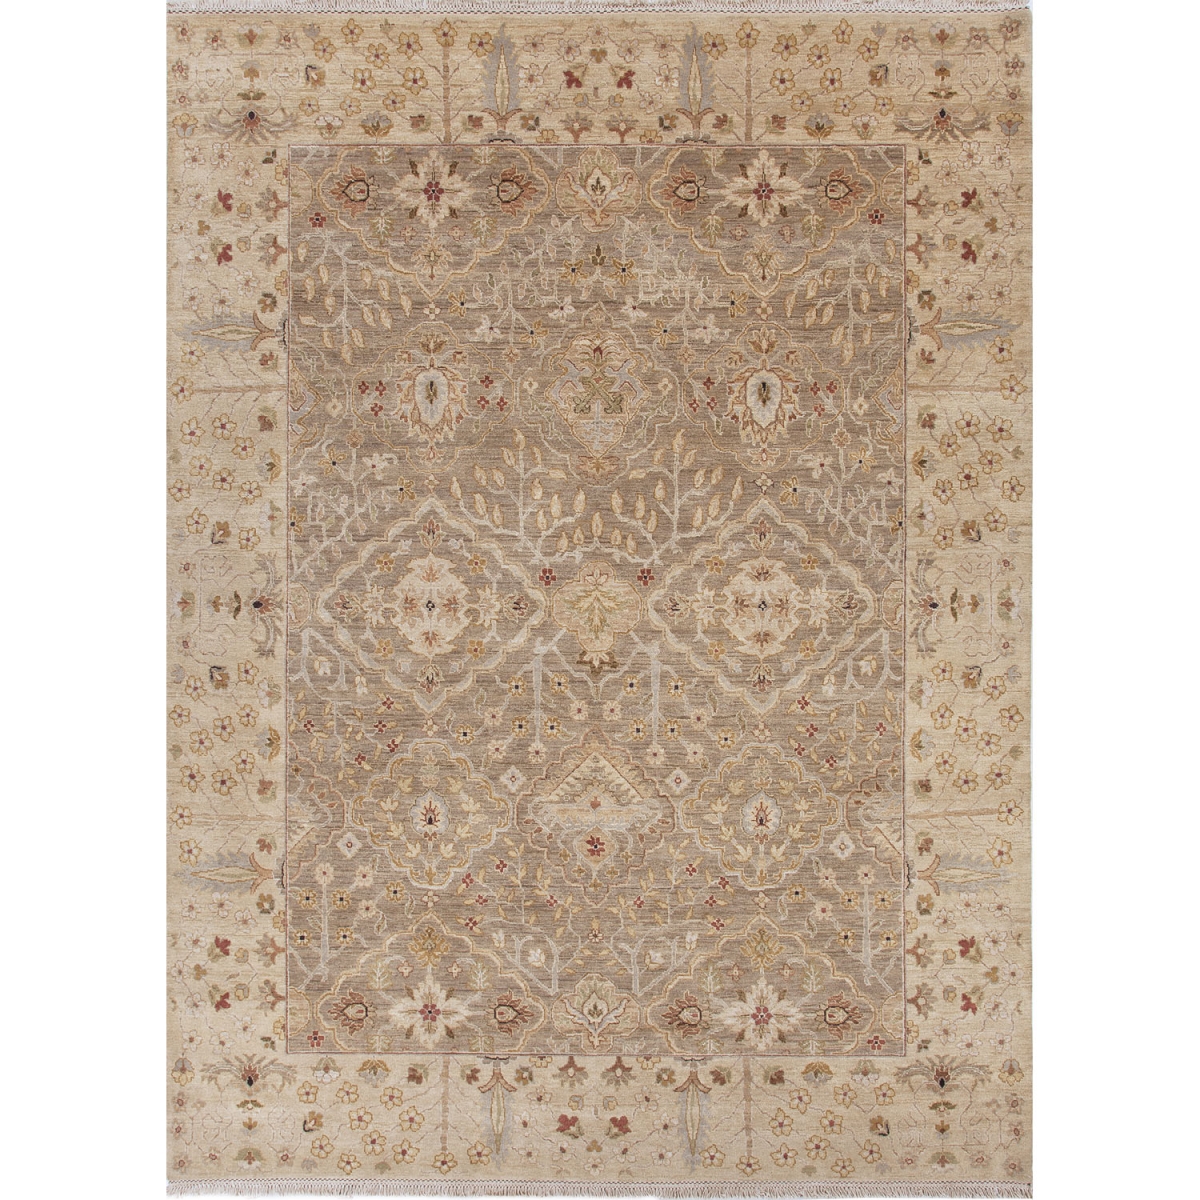 Rug103299 10 X 14 Ft. Opus Allegro Hand-knotted Floral Cream & Maroon Area Rug